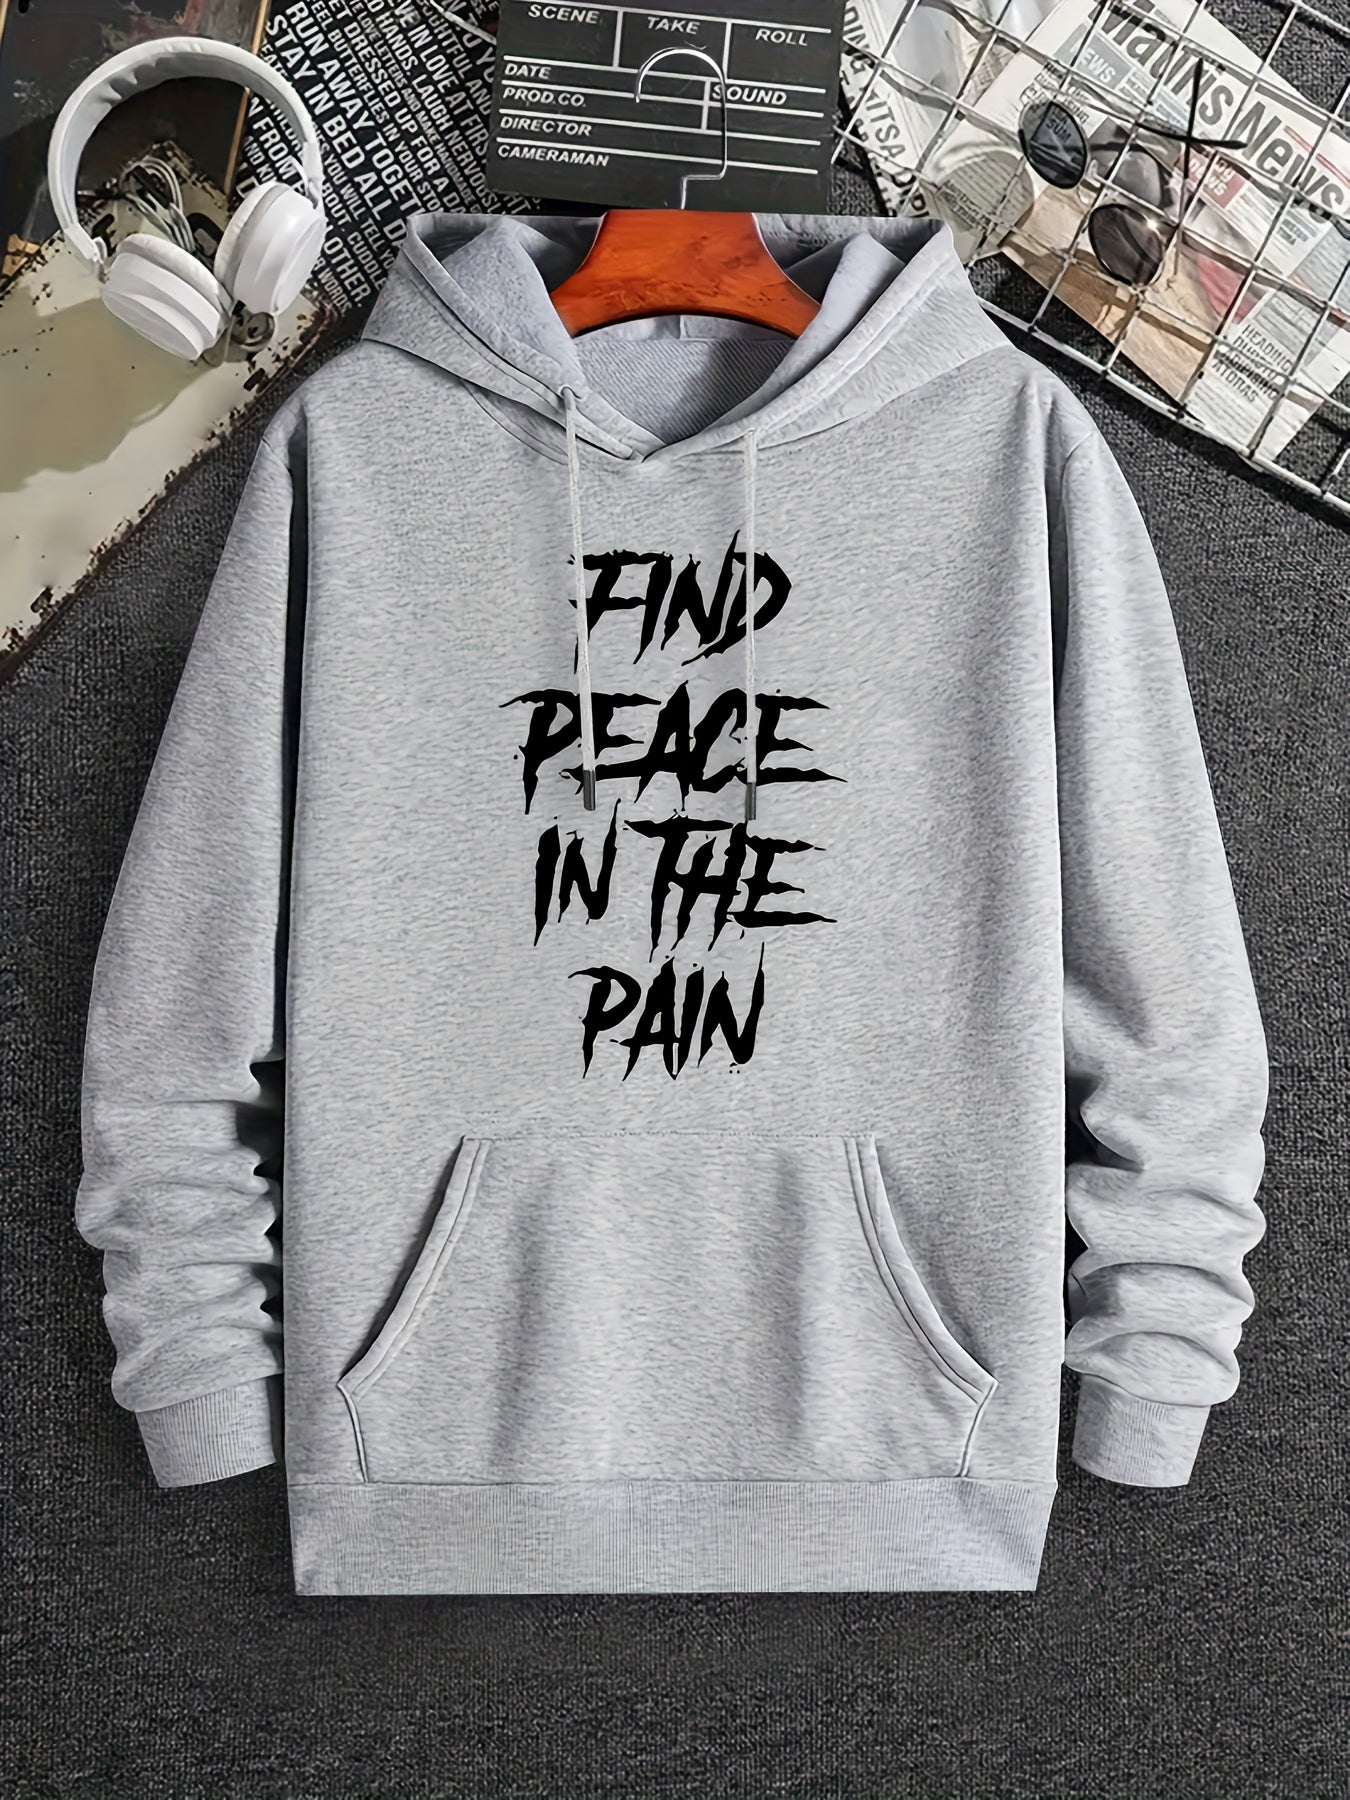 FIND PEACE IN THE PAIN Men's Christian Pullover Hooded Sweatshirt claimedbygoddesigns